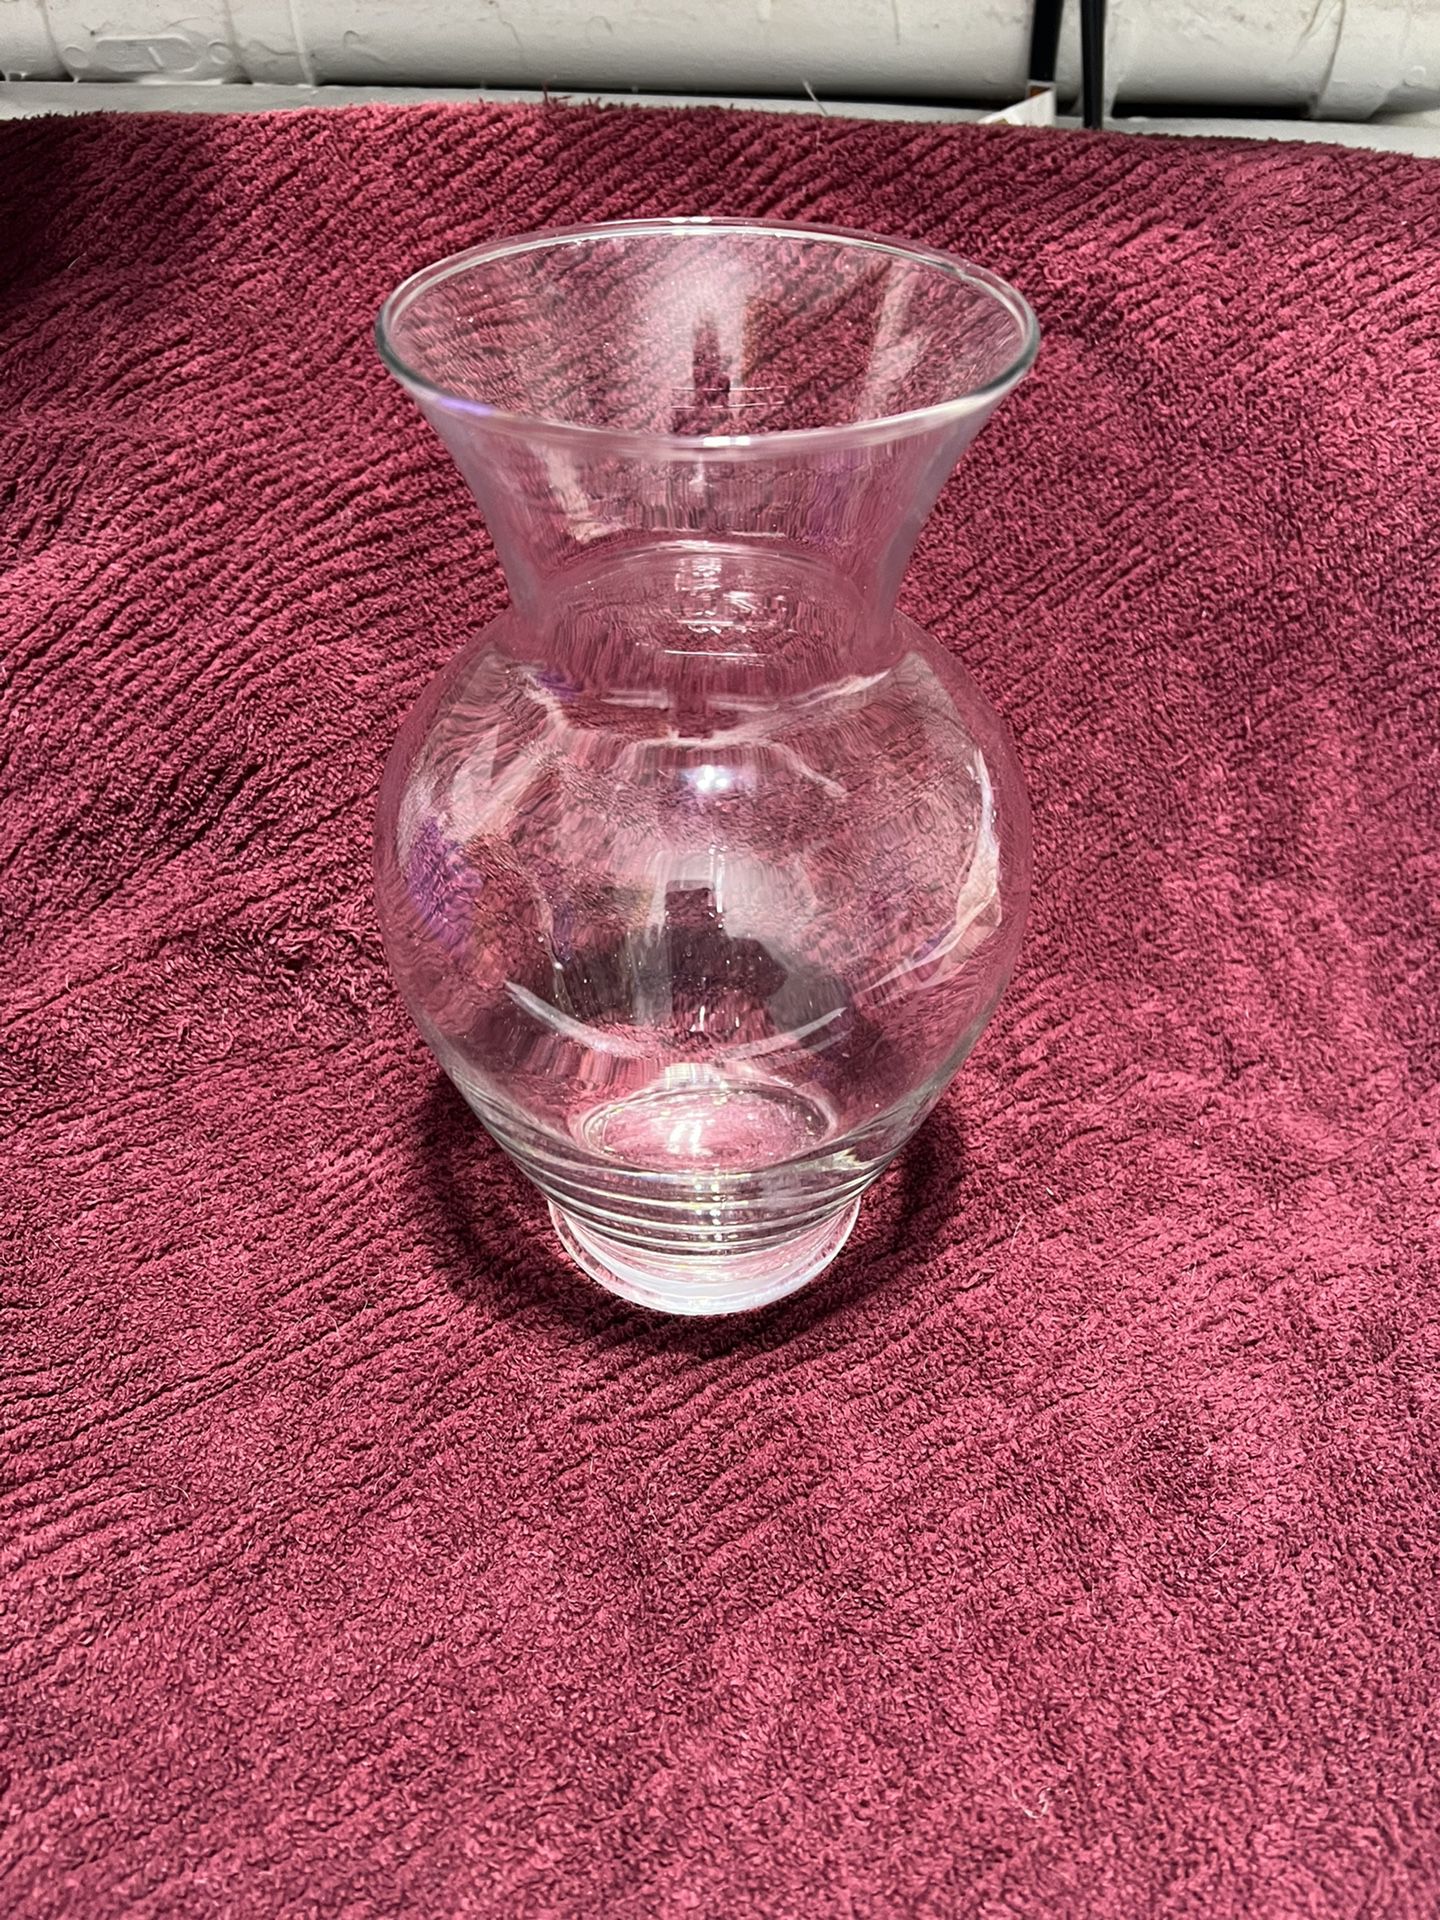 Glass Vase 9” x 5”.  $3. East Dundee . Hundreds of other items to look at.